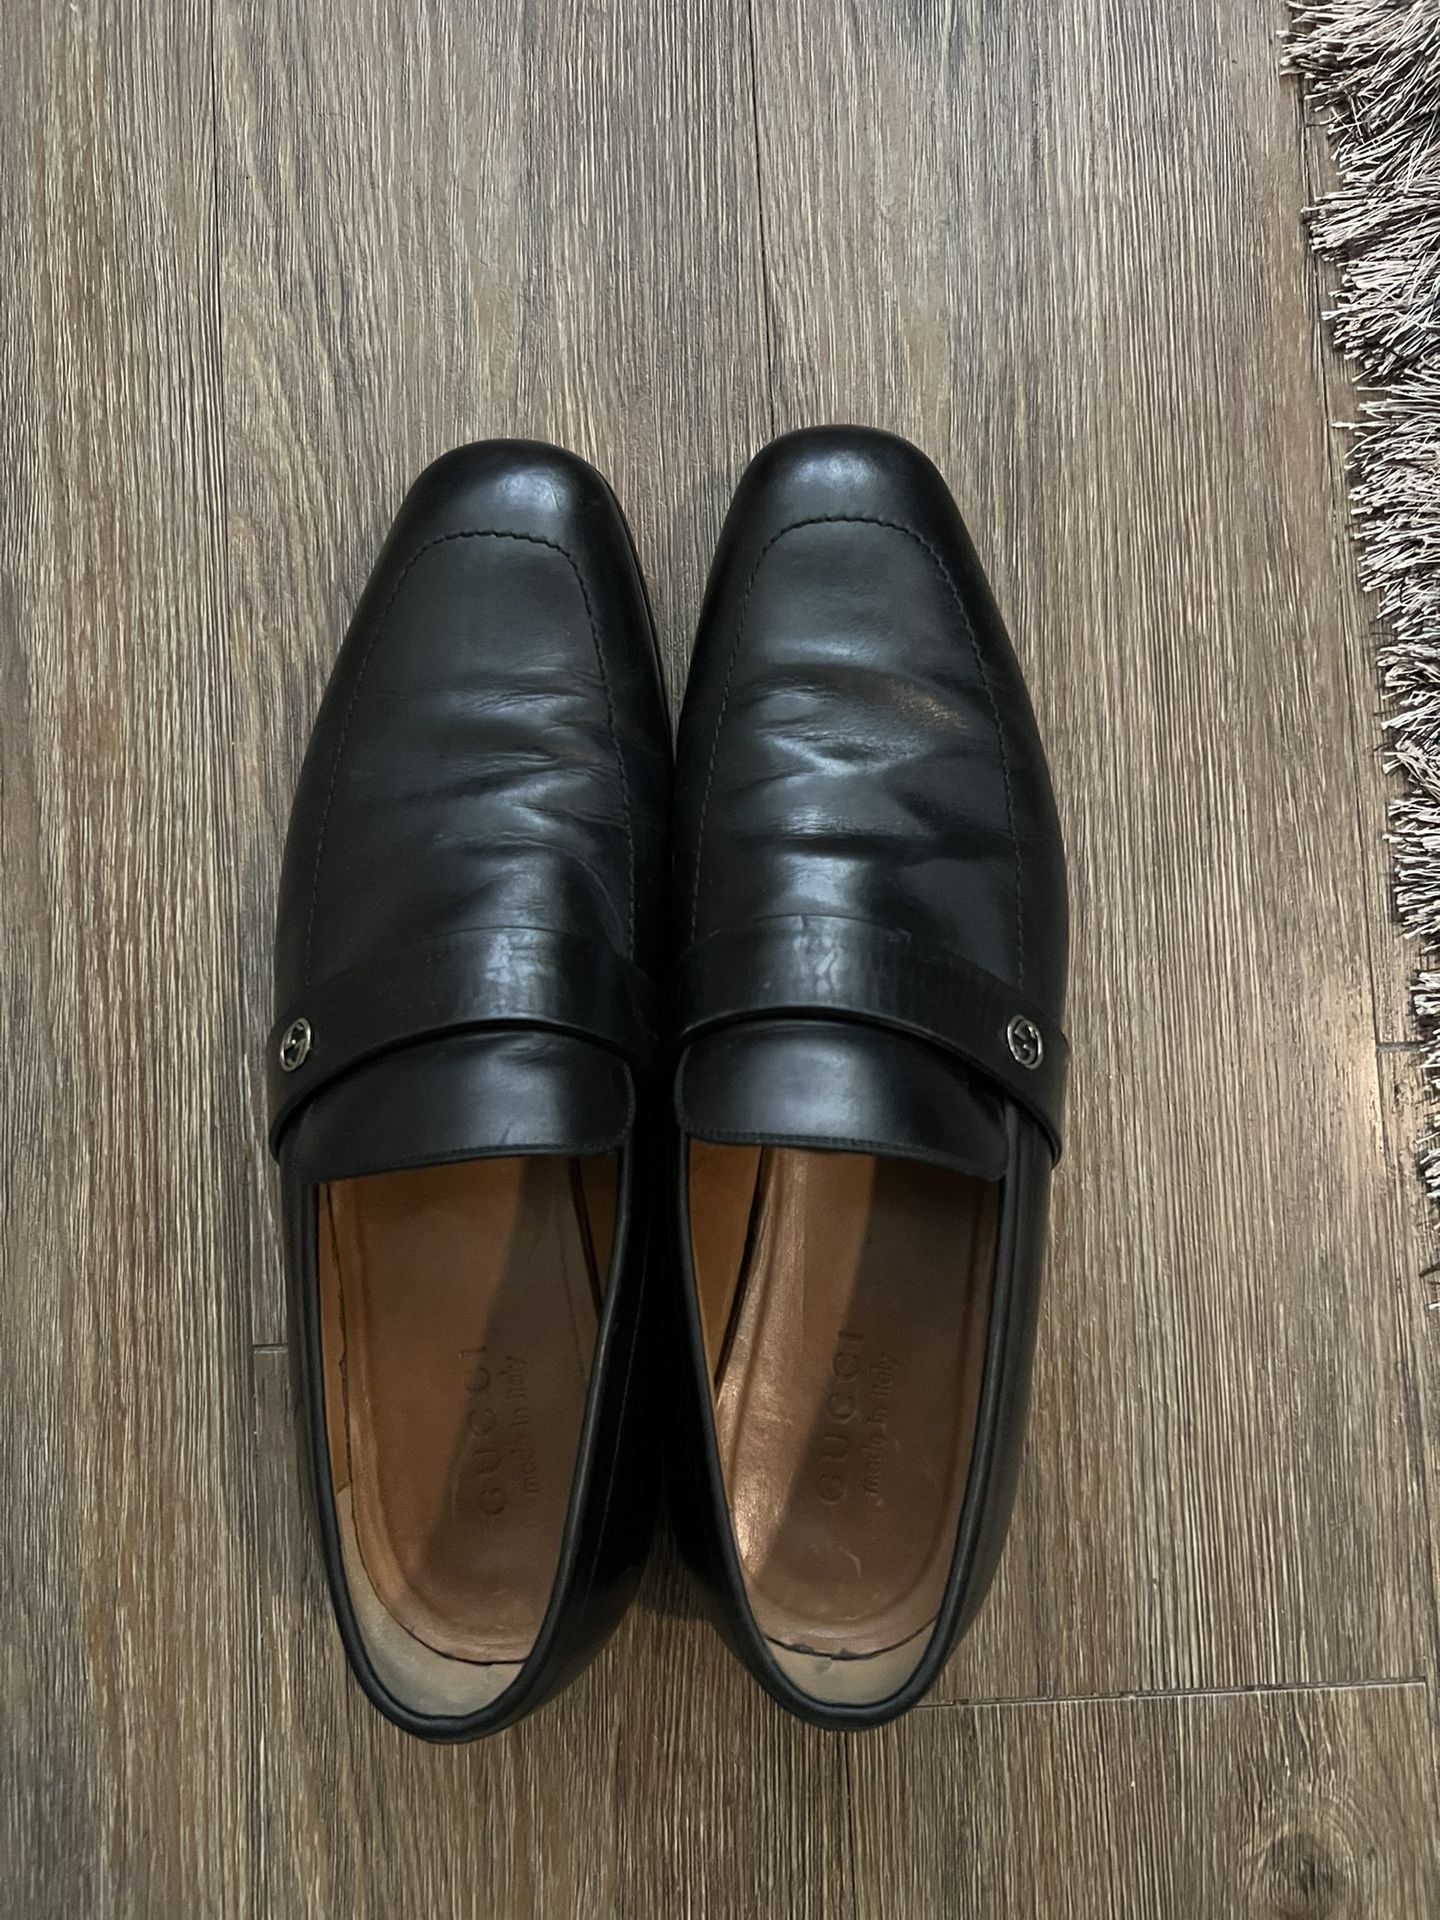 Gucci Black Leather Mens Loafers Interlocking GG 9.5 G / 10.5 US 